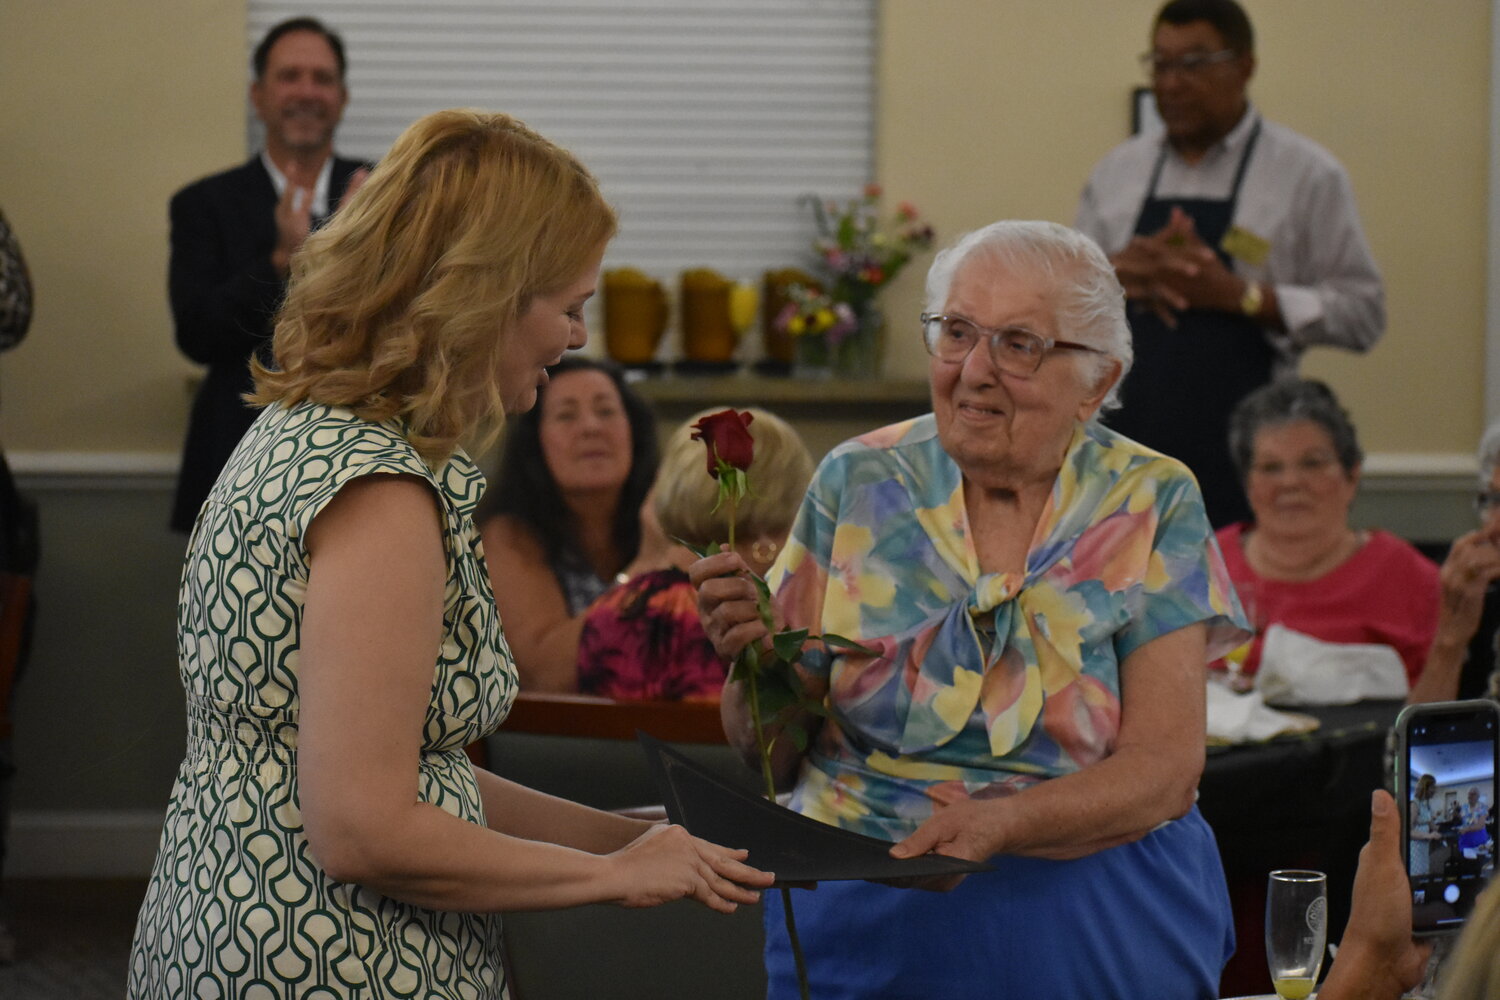 Josephine Trinca was the oldest member, at 101 years old, at this year’s Centenarian Luncheon at THE PLAYERS Community Senior Center and was honored with a rose and a special commemorative plaque.